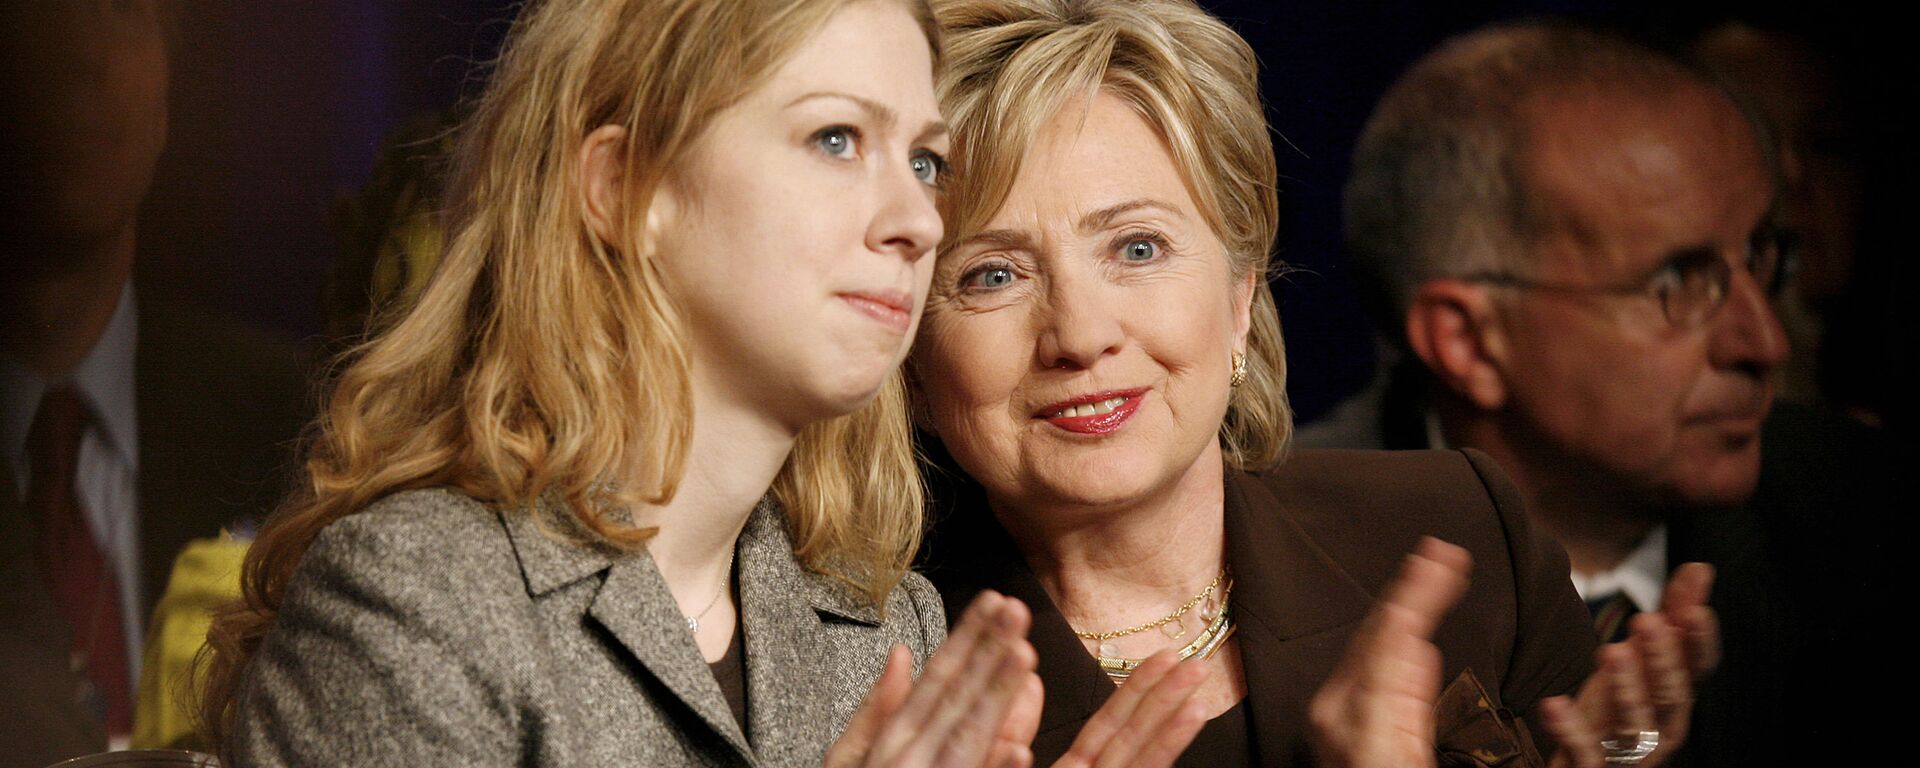 Chelsea Clinton, left, and her mother, former Democratic presidential candidate Hillary Clinton. (File ) - Sputnik International, 1920, 12.02.2020